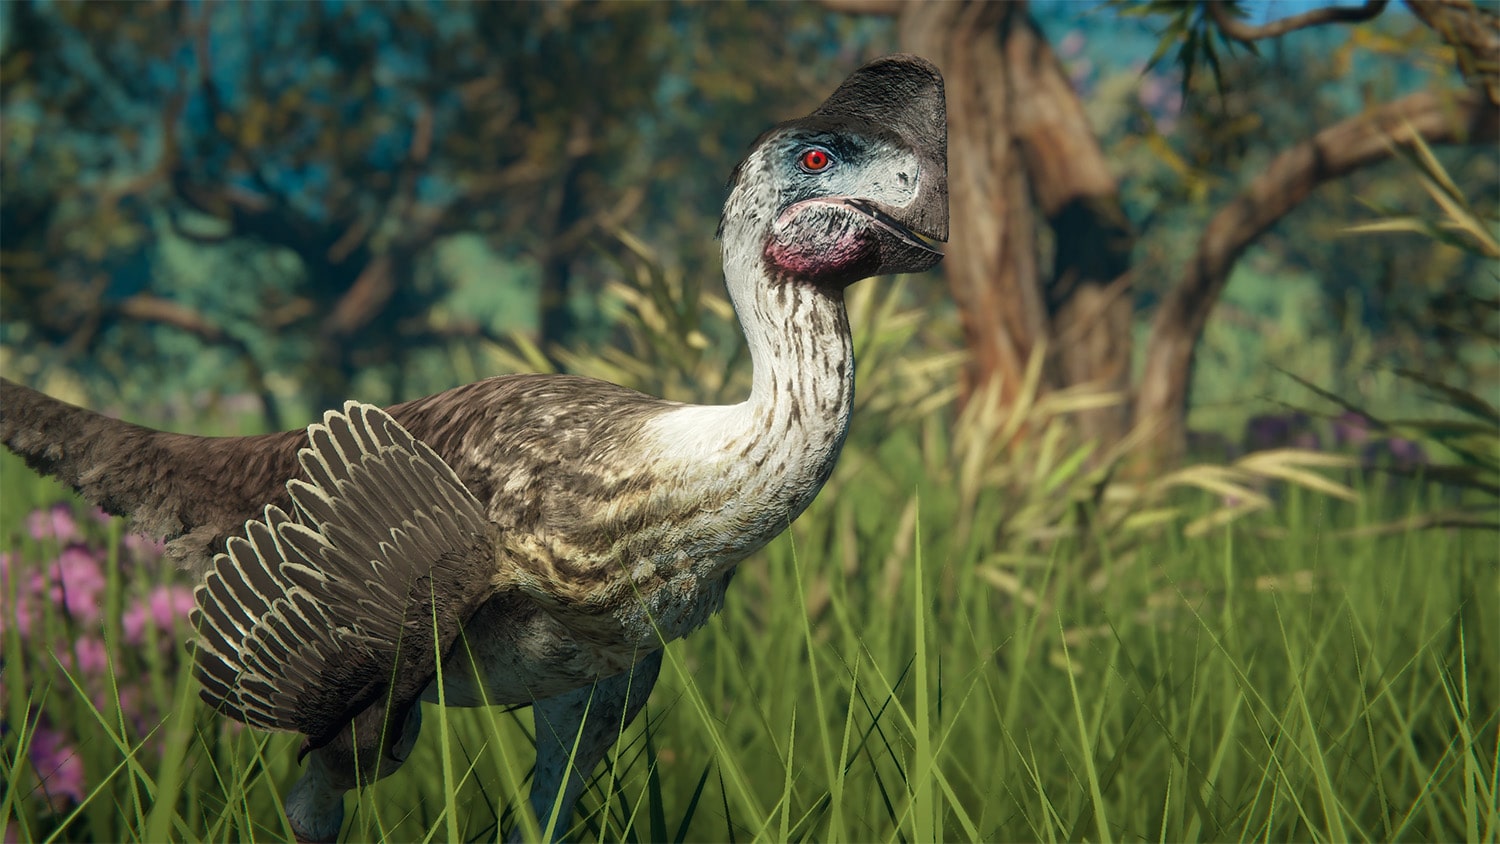 22 interesting facts about Oviraptor